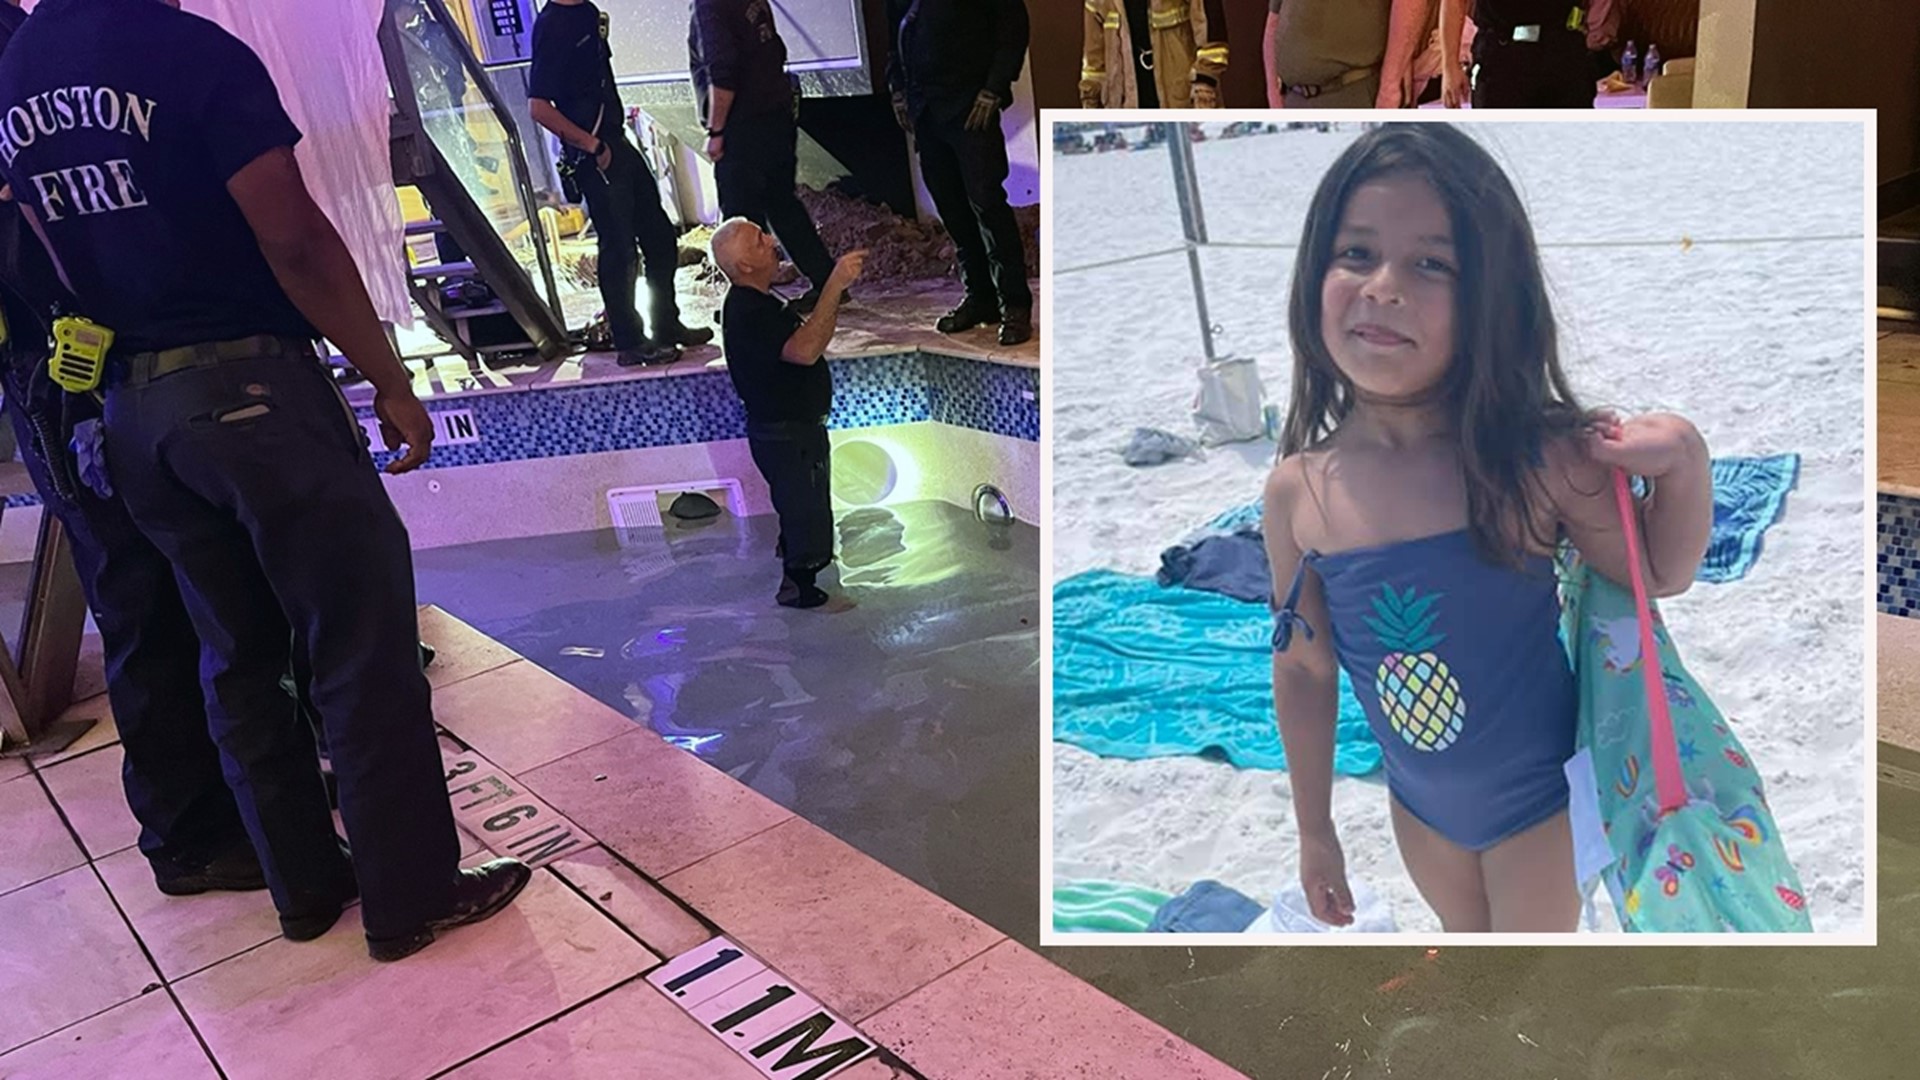 The family's attorney said they believe the 5-year-old was being sucked into an uncovered pipe in the hotel pool and Aliyah Jaico was trying to help her.